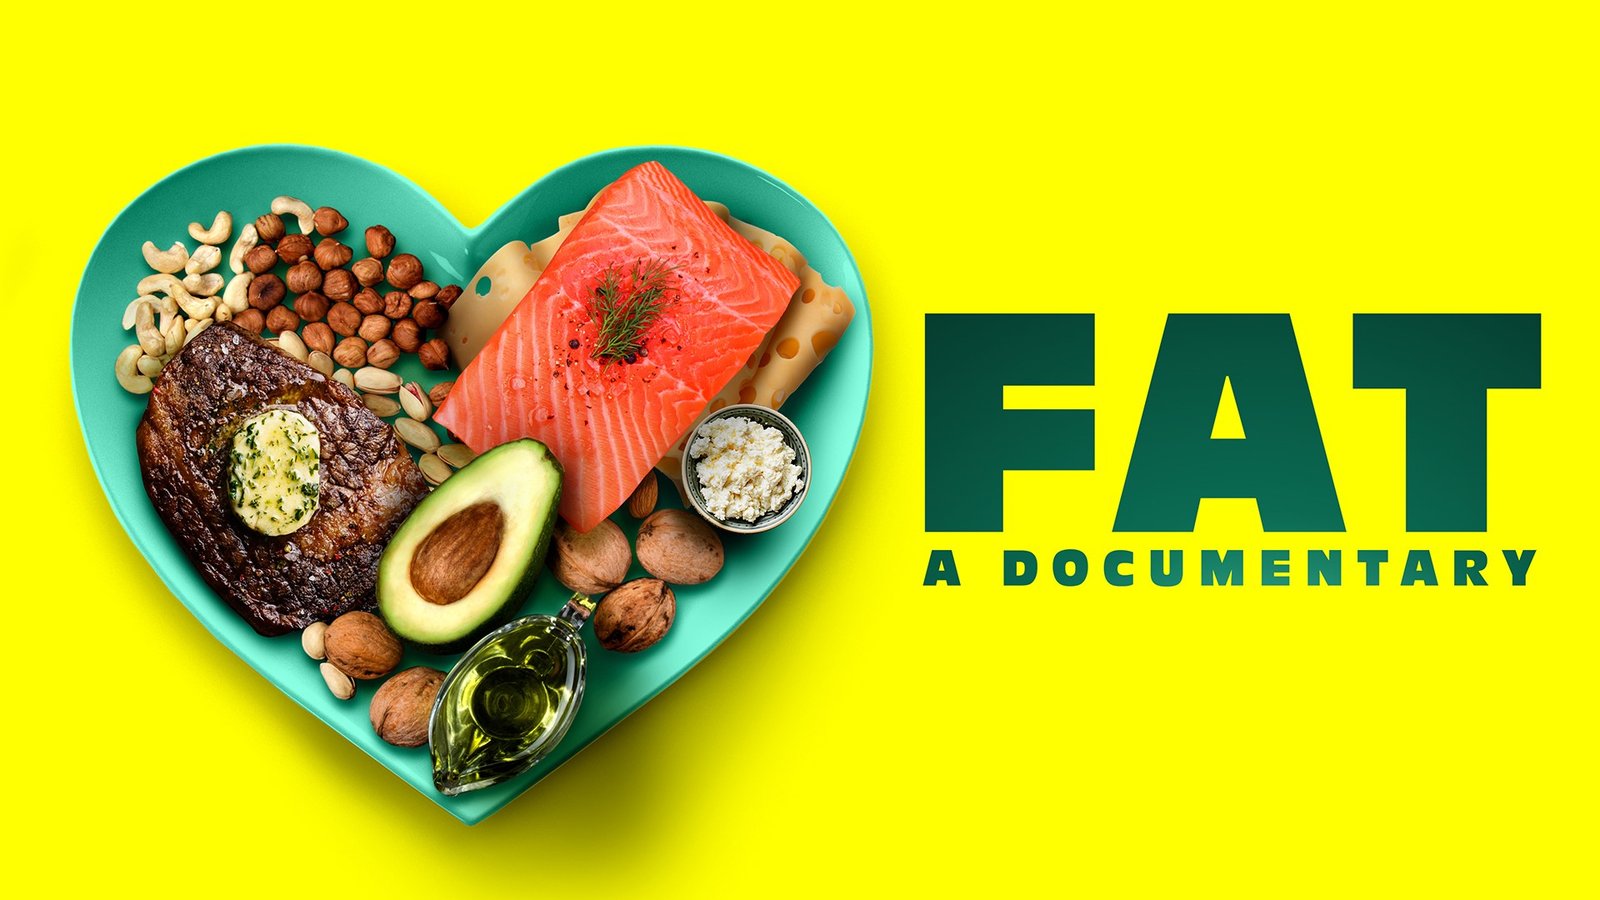 Fat: A Documentary - Debunking Myths About Nutrition